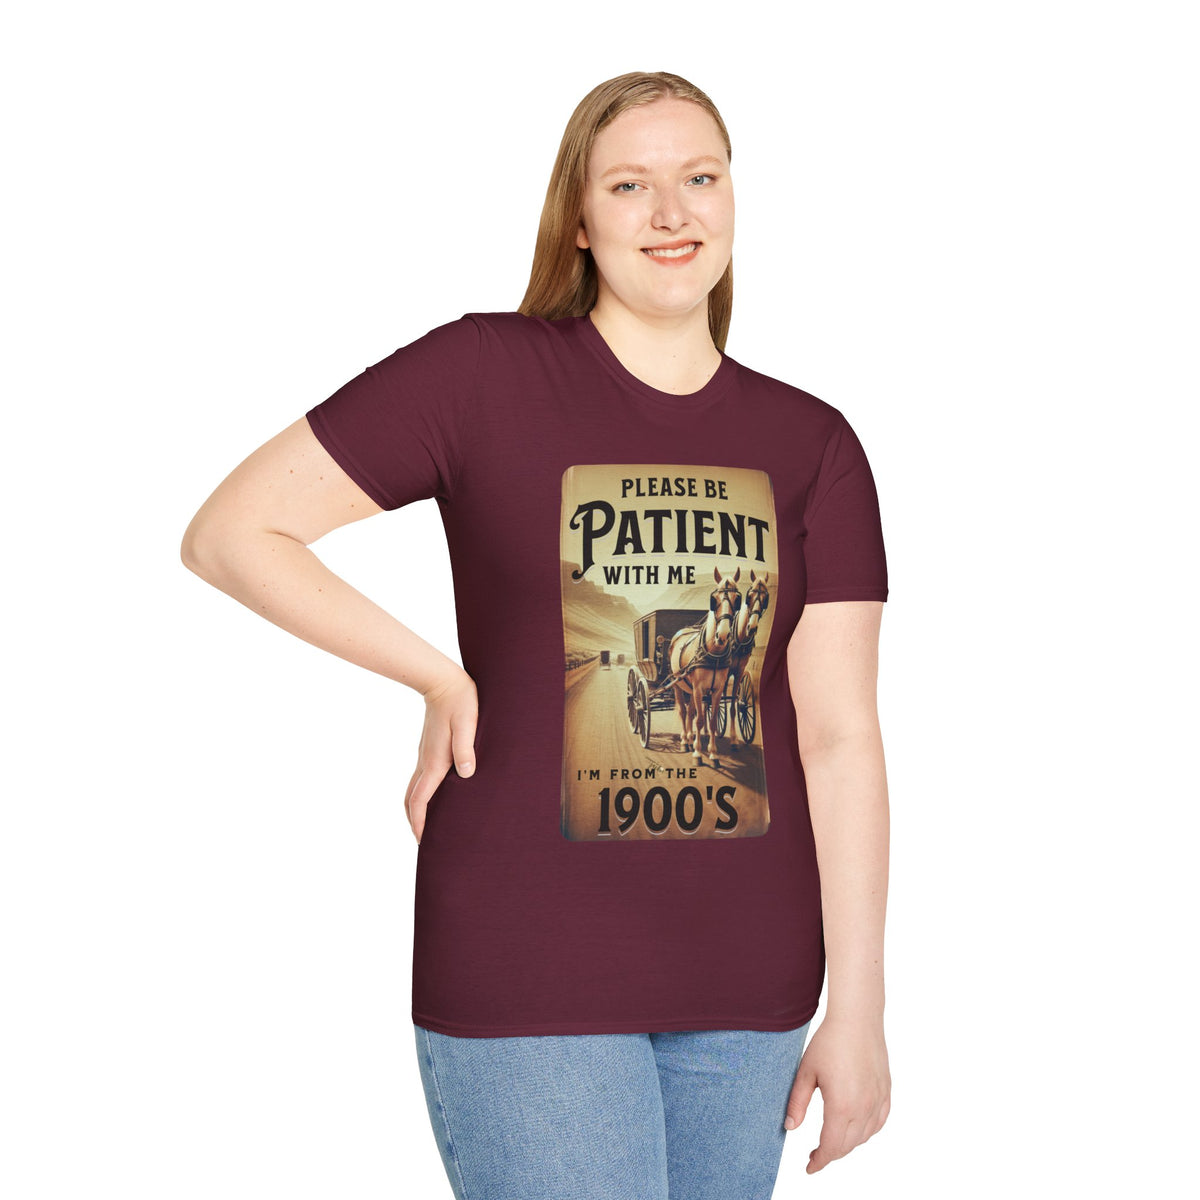 I'm from the 1900s - Softstyle T-Shirt